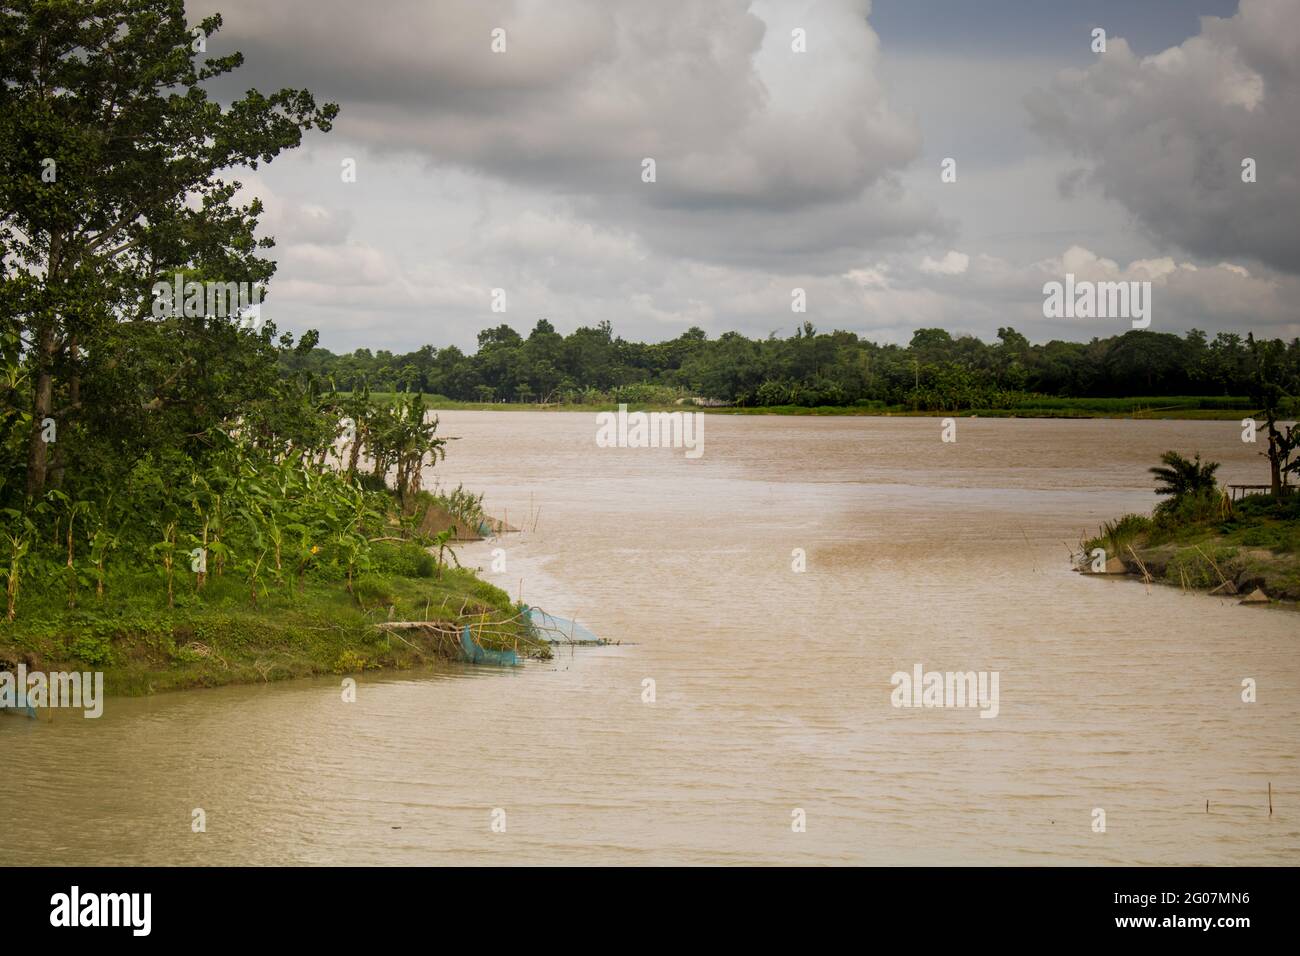 Bangladesh is a riverine country. A beautiful Crooked small river. The small river merges with the big river. Stock Photo